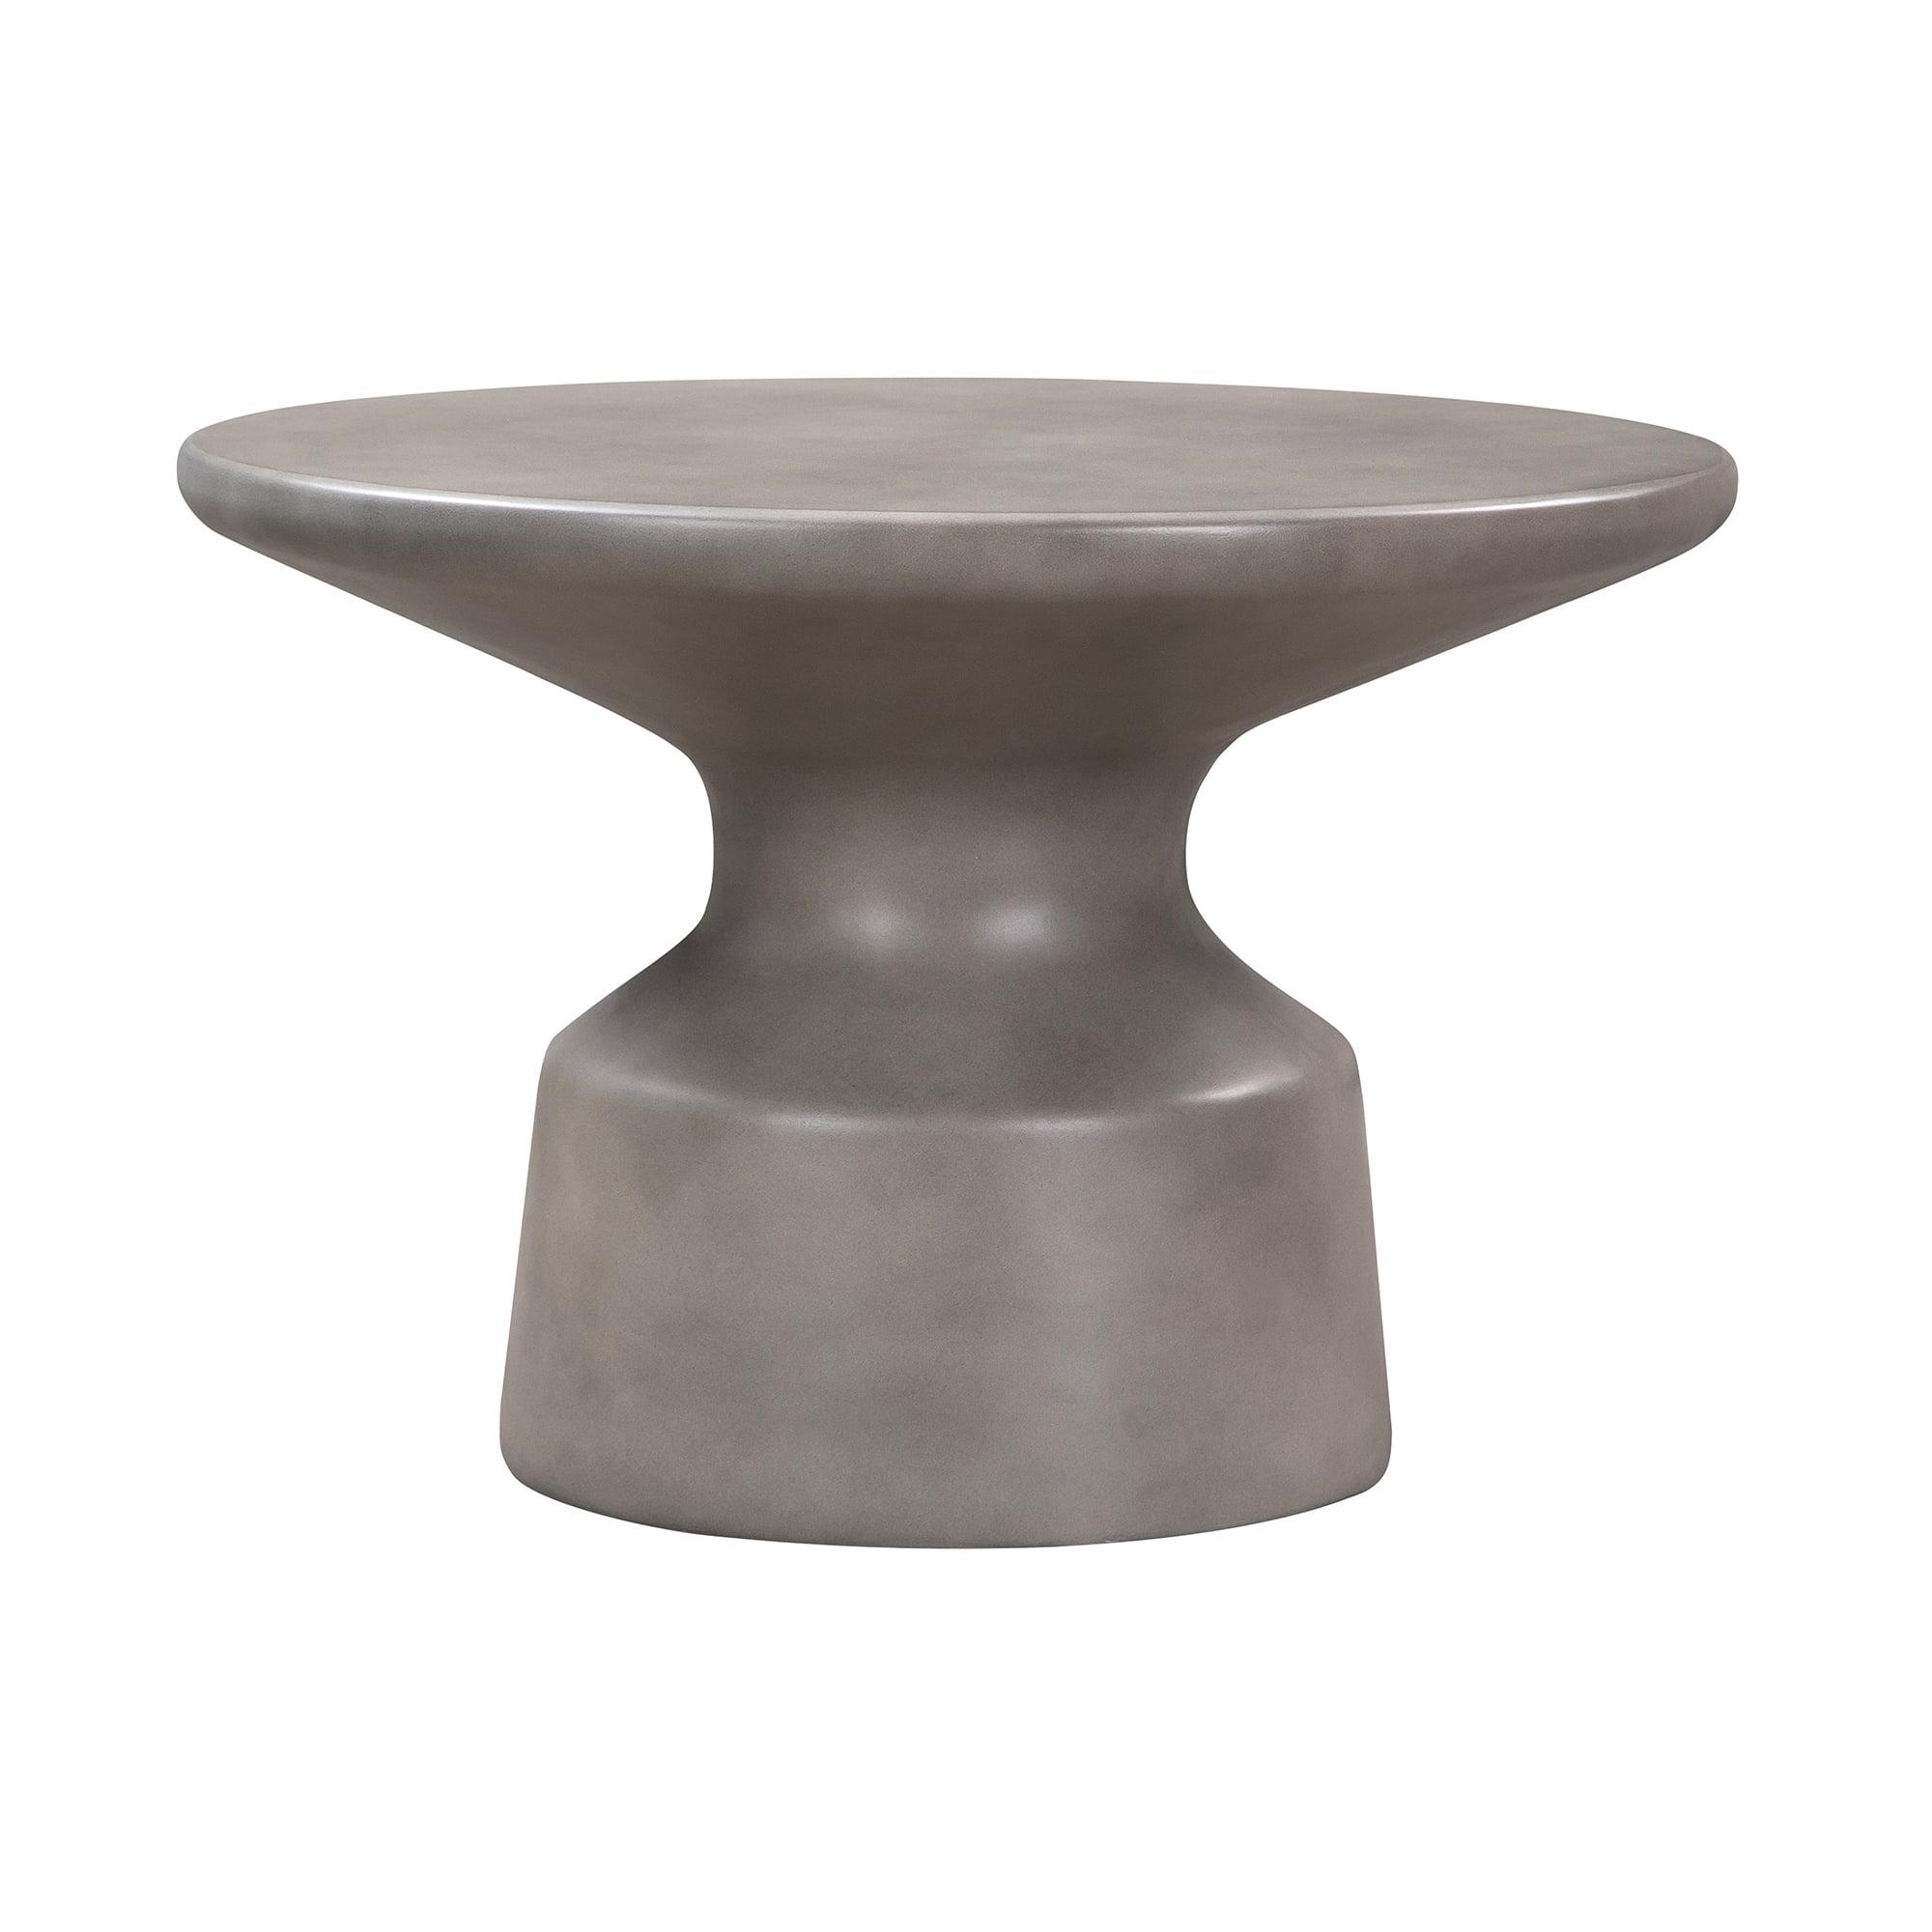 Sephie 24" Modern Round Pedestal Coffee Table in Gray Resin